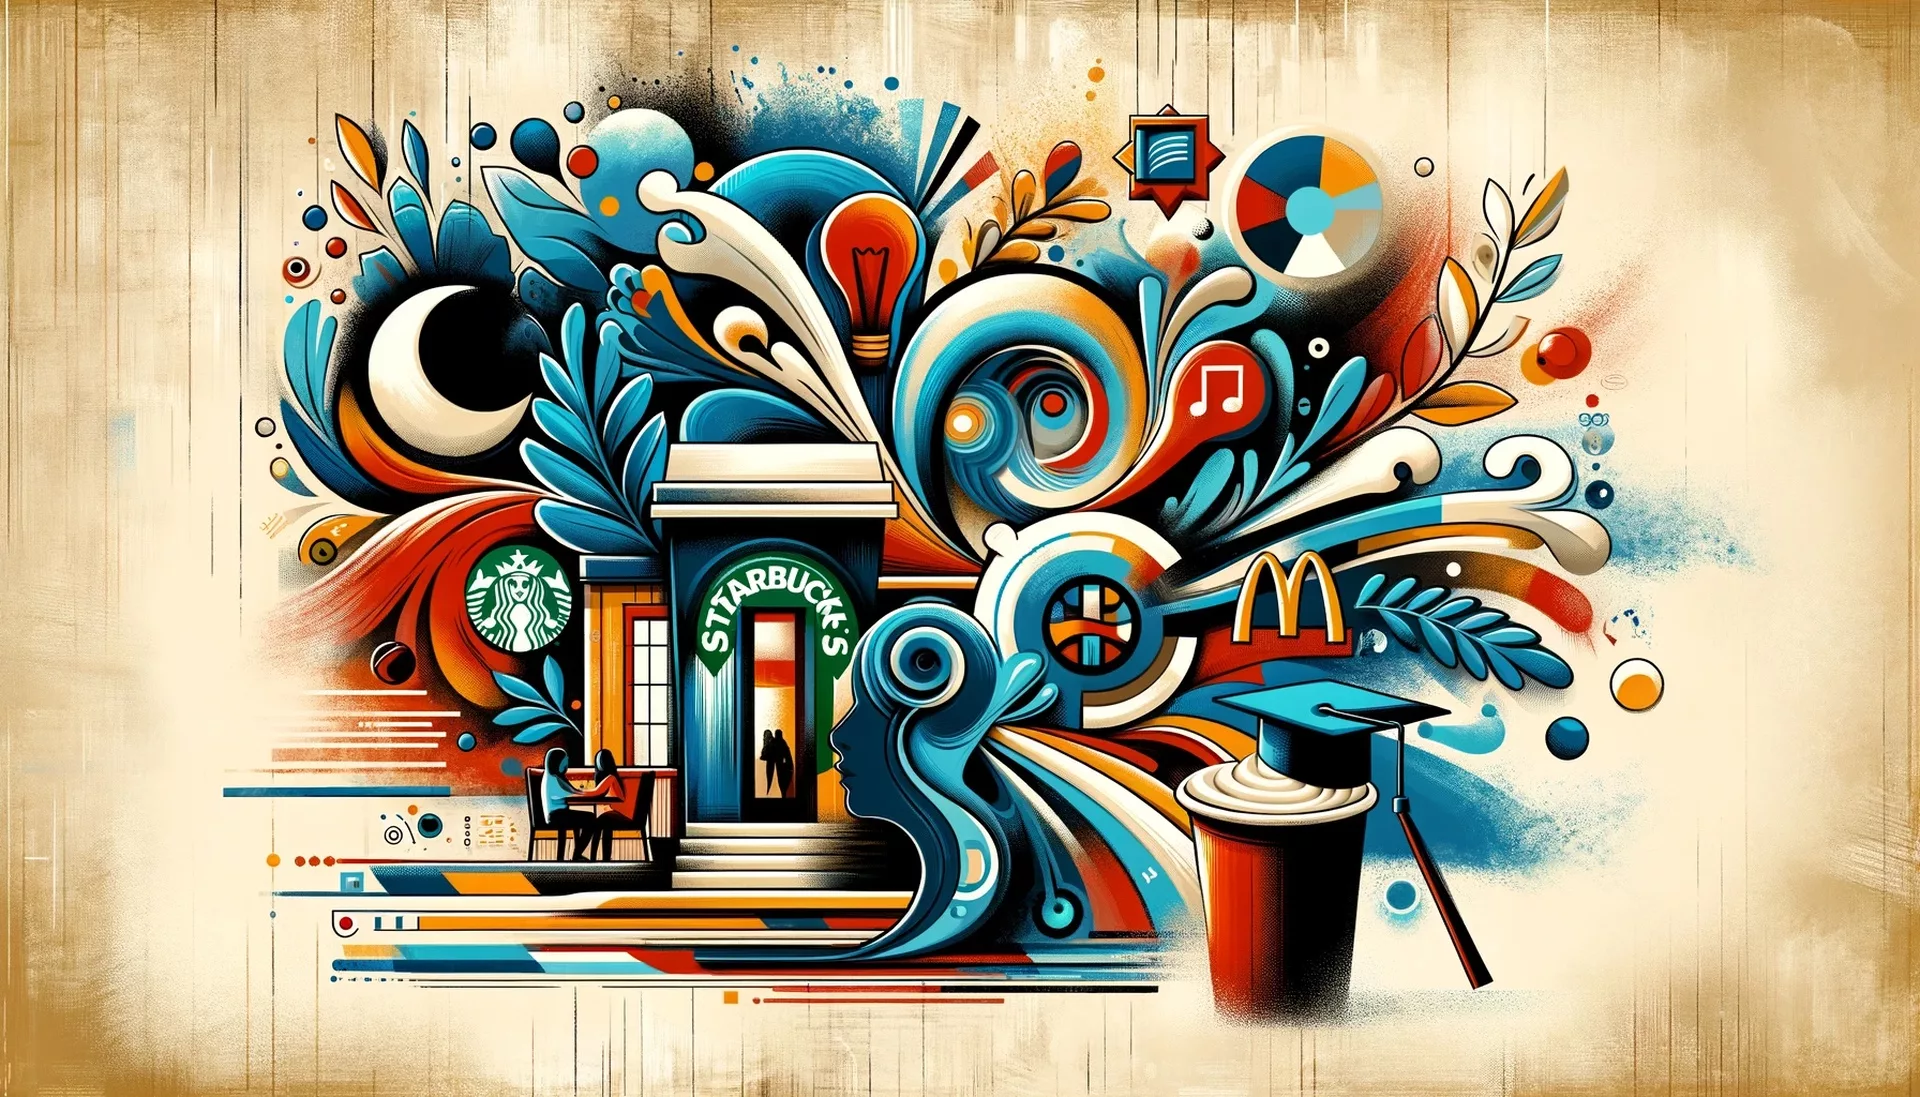 Colorful abstract mural featuring Starbucks and McDonald's among whimsical designs.